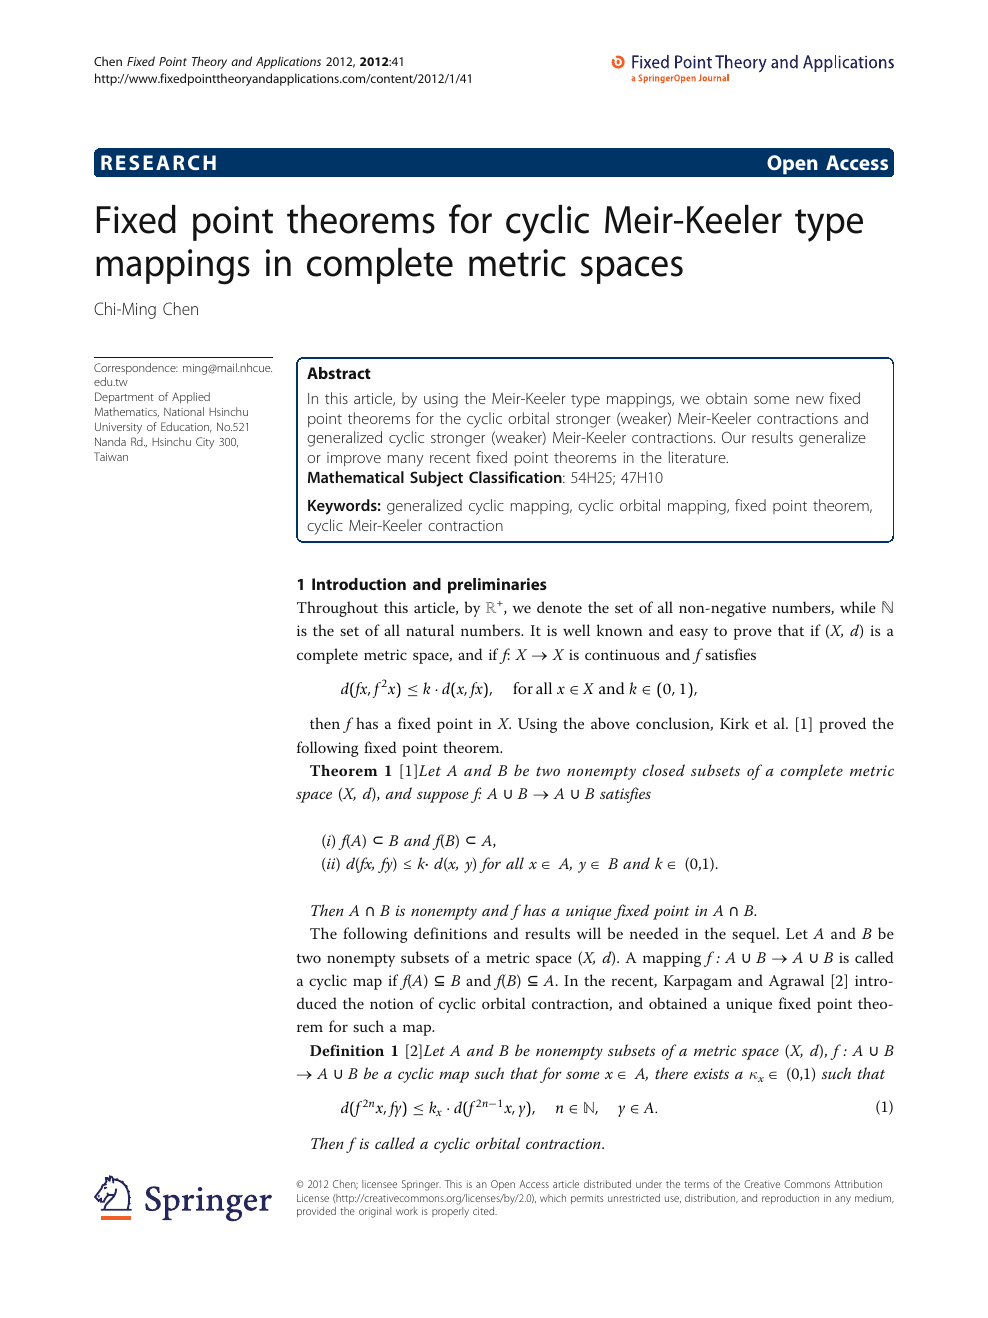 Fixed Point Theorems For Cyclic Meir Keeler Type Mappings In Complete Metric Spaces Topic Of Research Paper In Mathematics Download Scholarly Article Pdf And Read For Free On Cyberleninka Open Science Hub